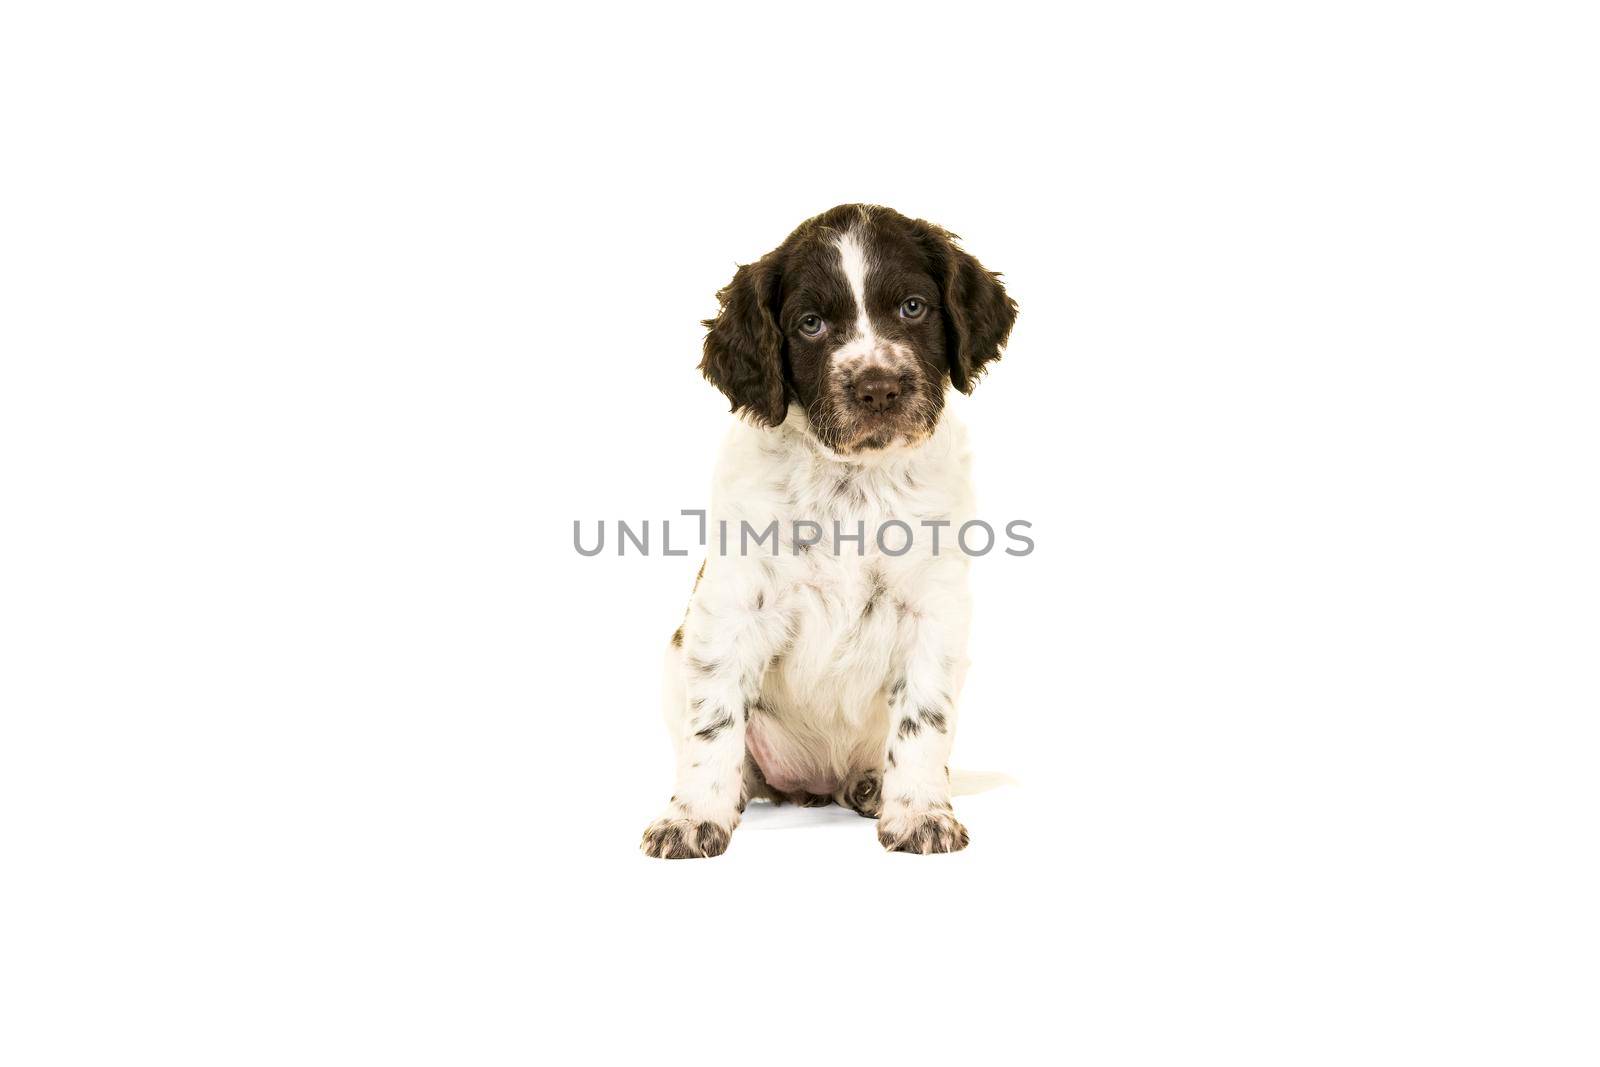 A Cute Small Munsterlander Puppy sitting on isolated on a white background